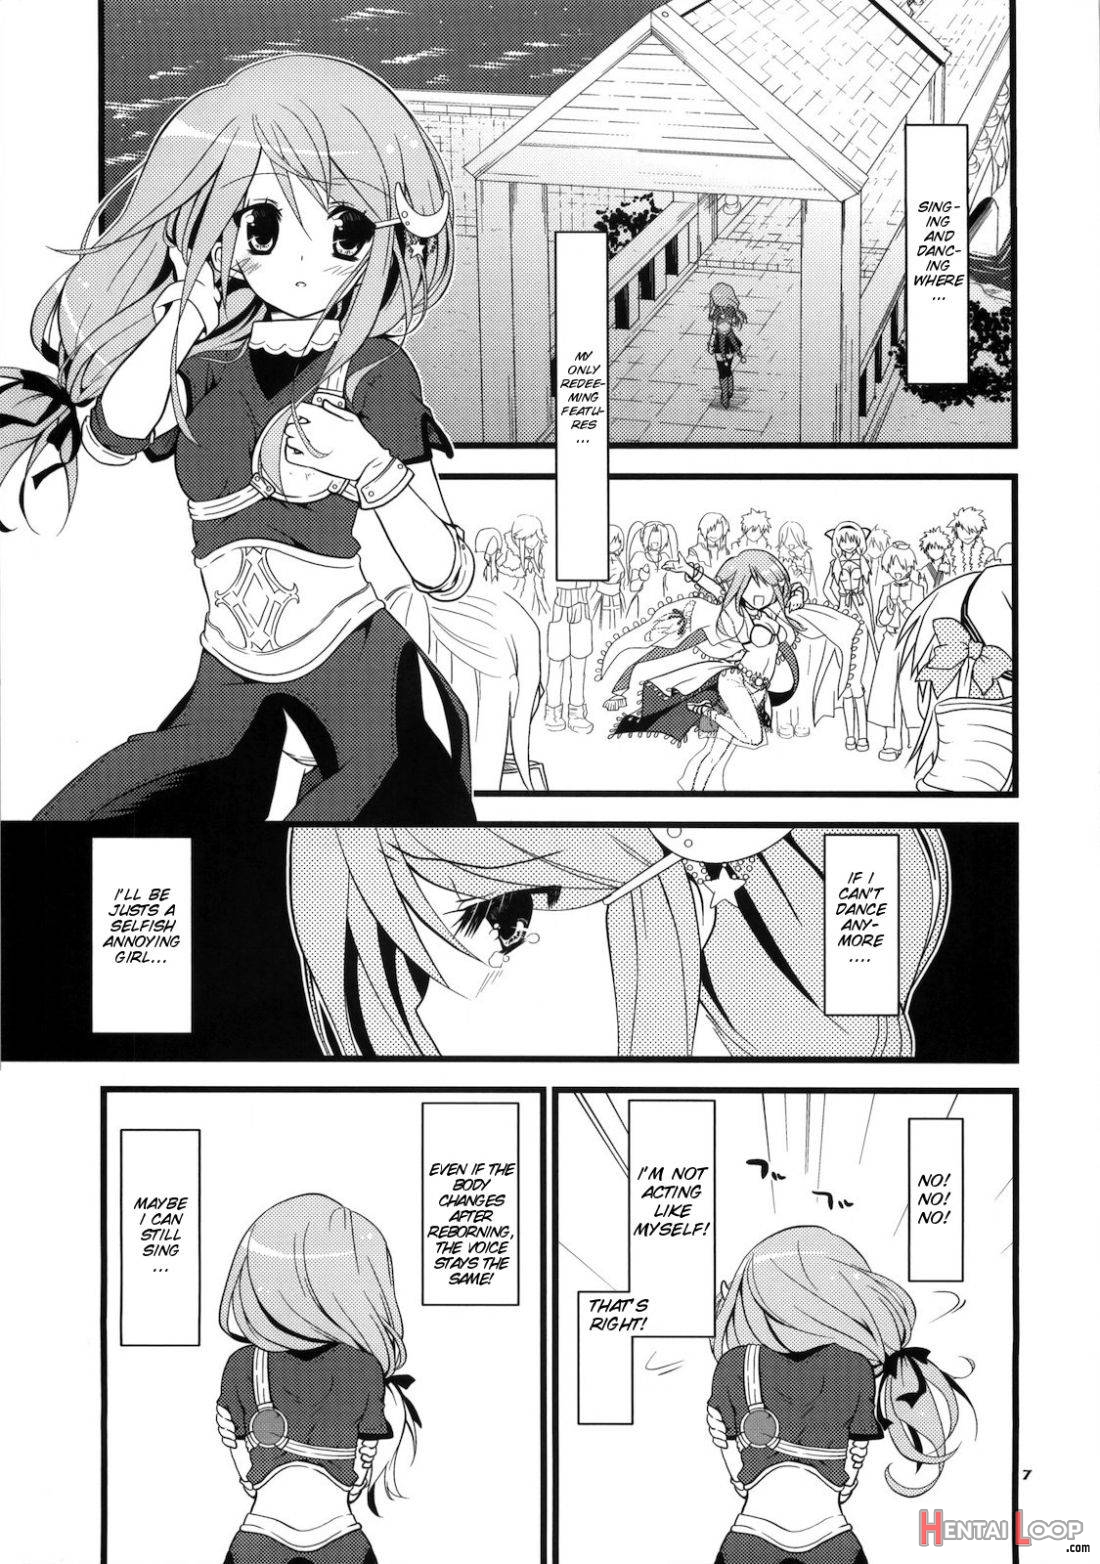 Daily Ro 3 page 7